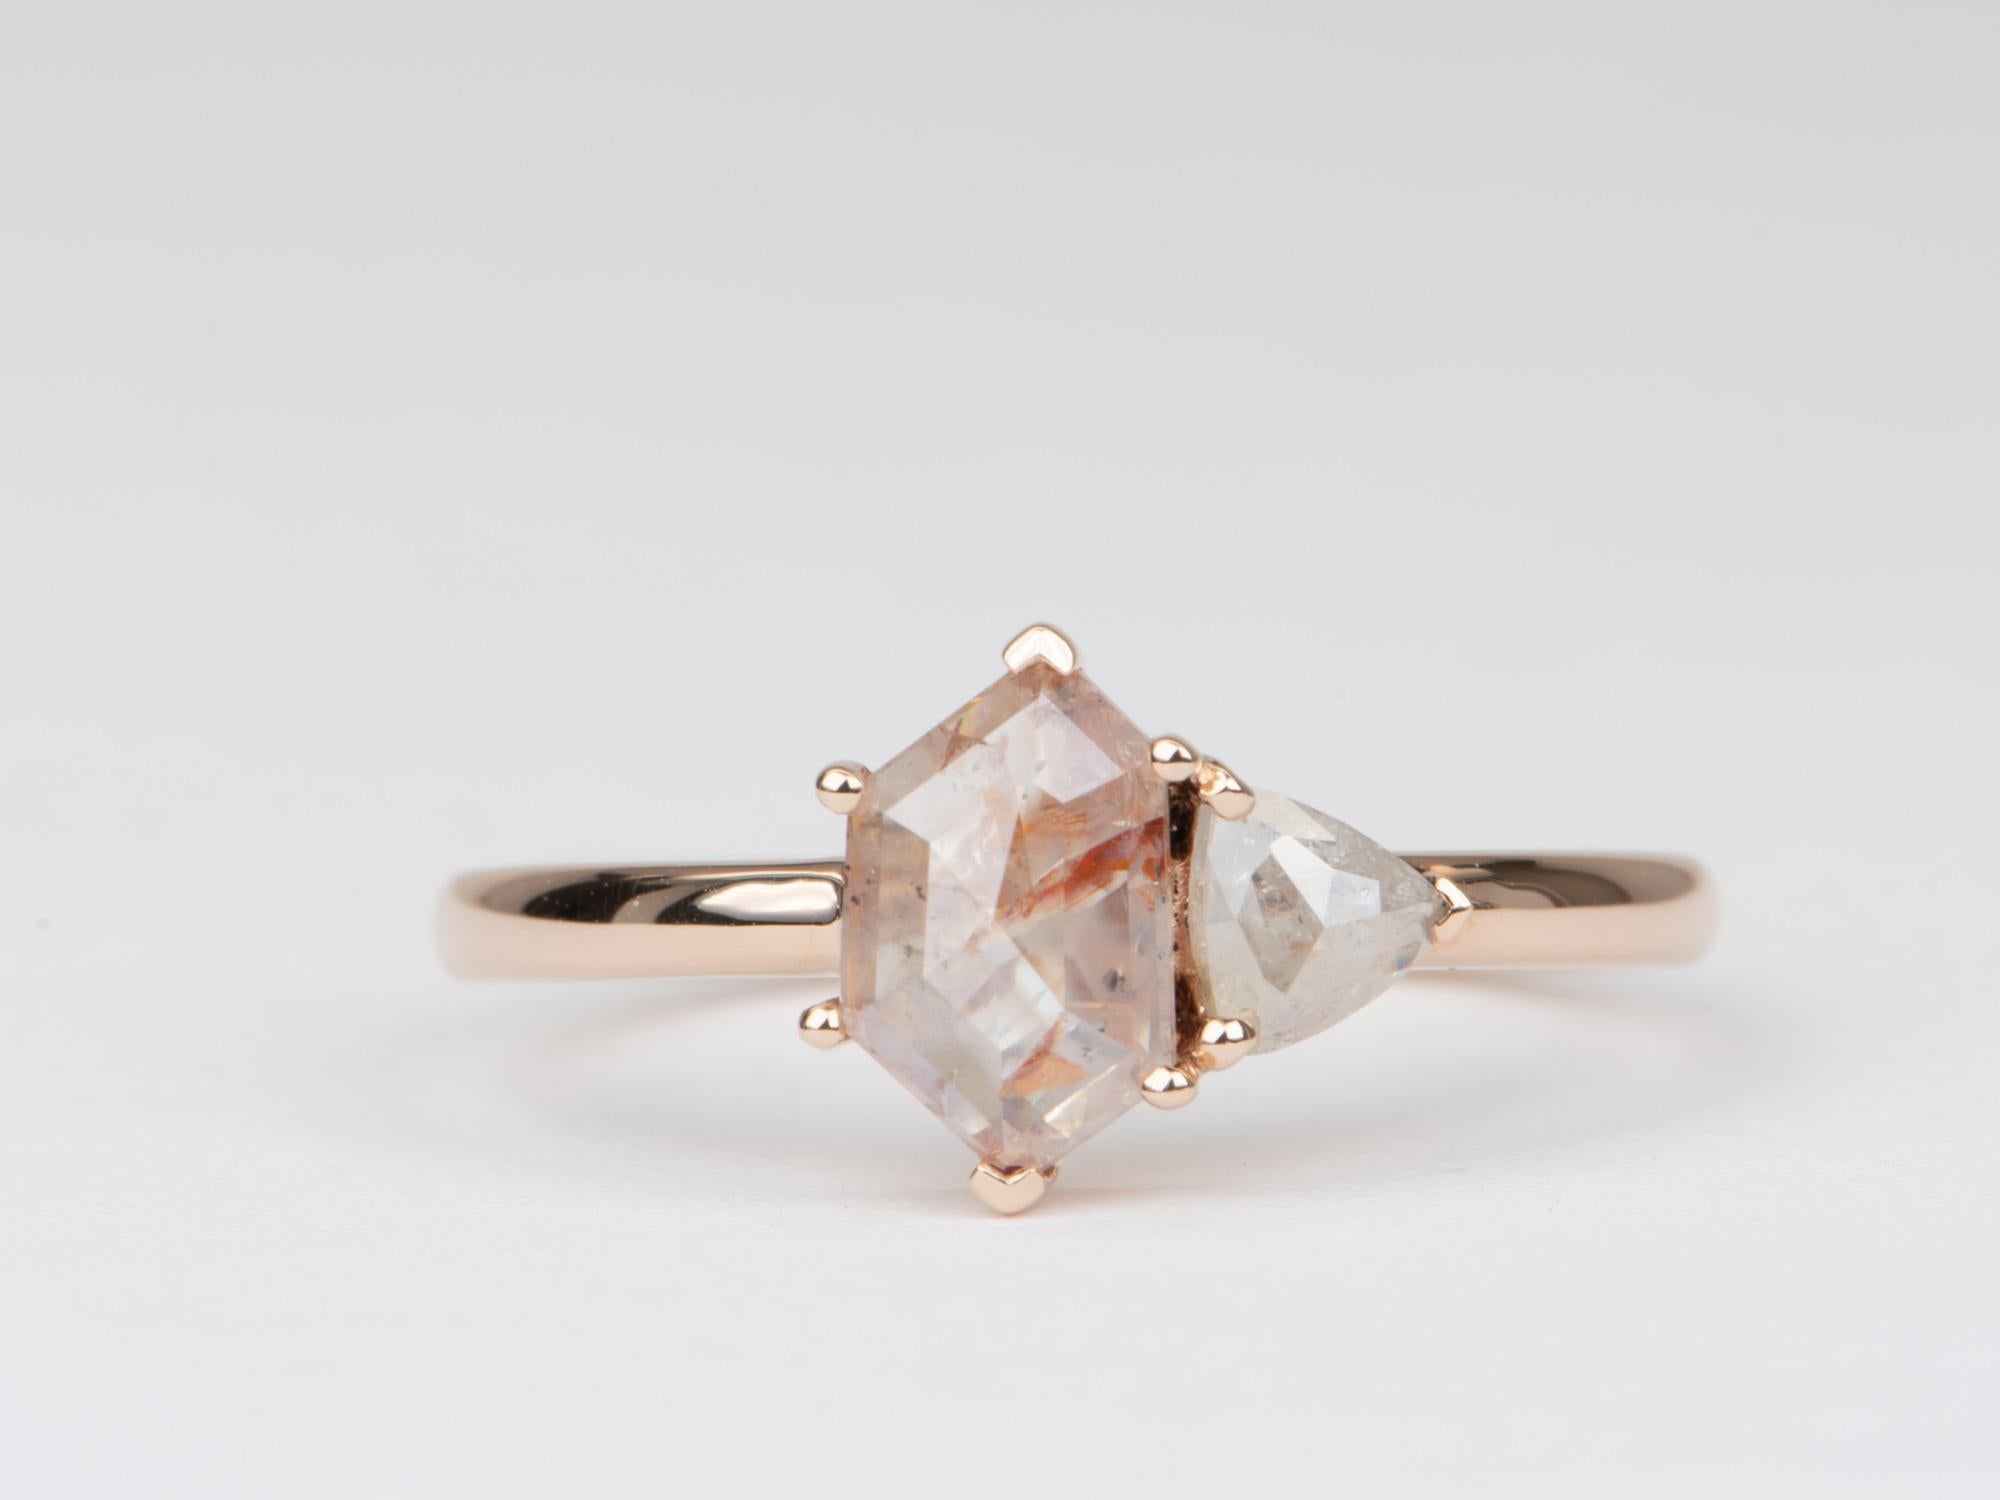 ♥ Solid 14K rose gold ring set with two gorgeous translucent rose cut diamonds
♥ This larger hexagon diamond has excellent transparency with some light coral/orange color inclusions, reminding us of the koi fish in a koi pond, thus we termed this